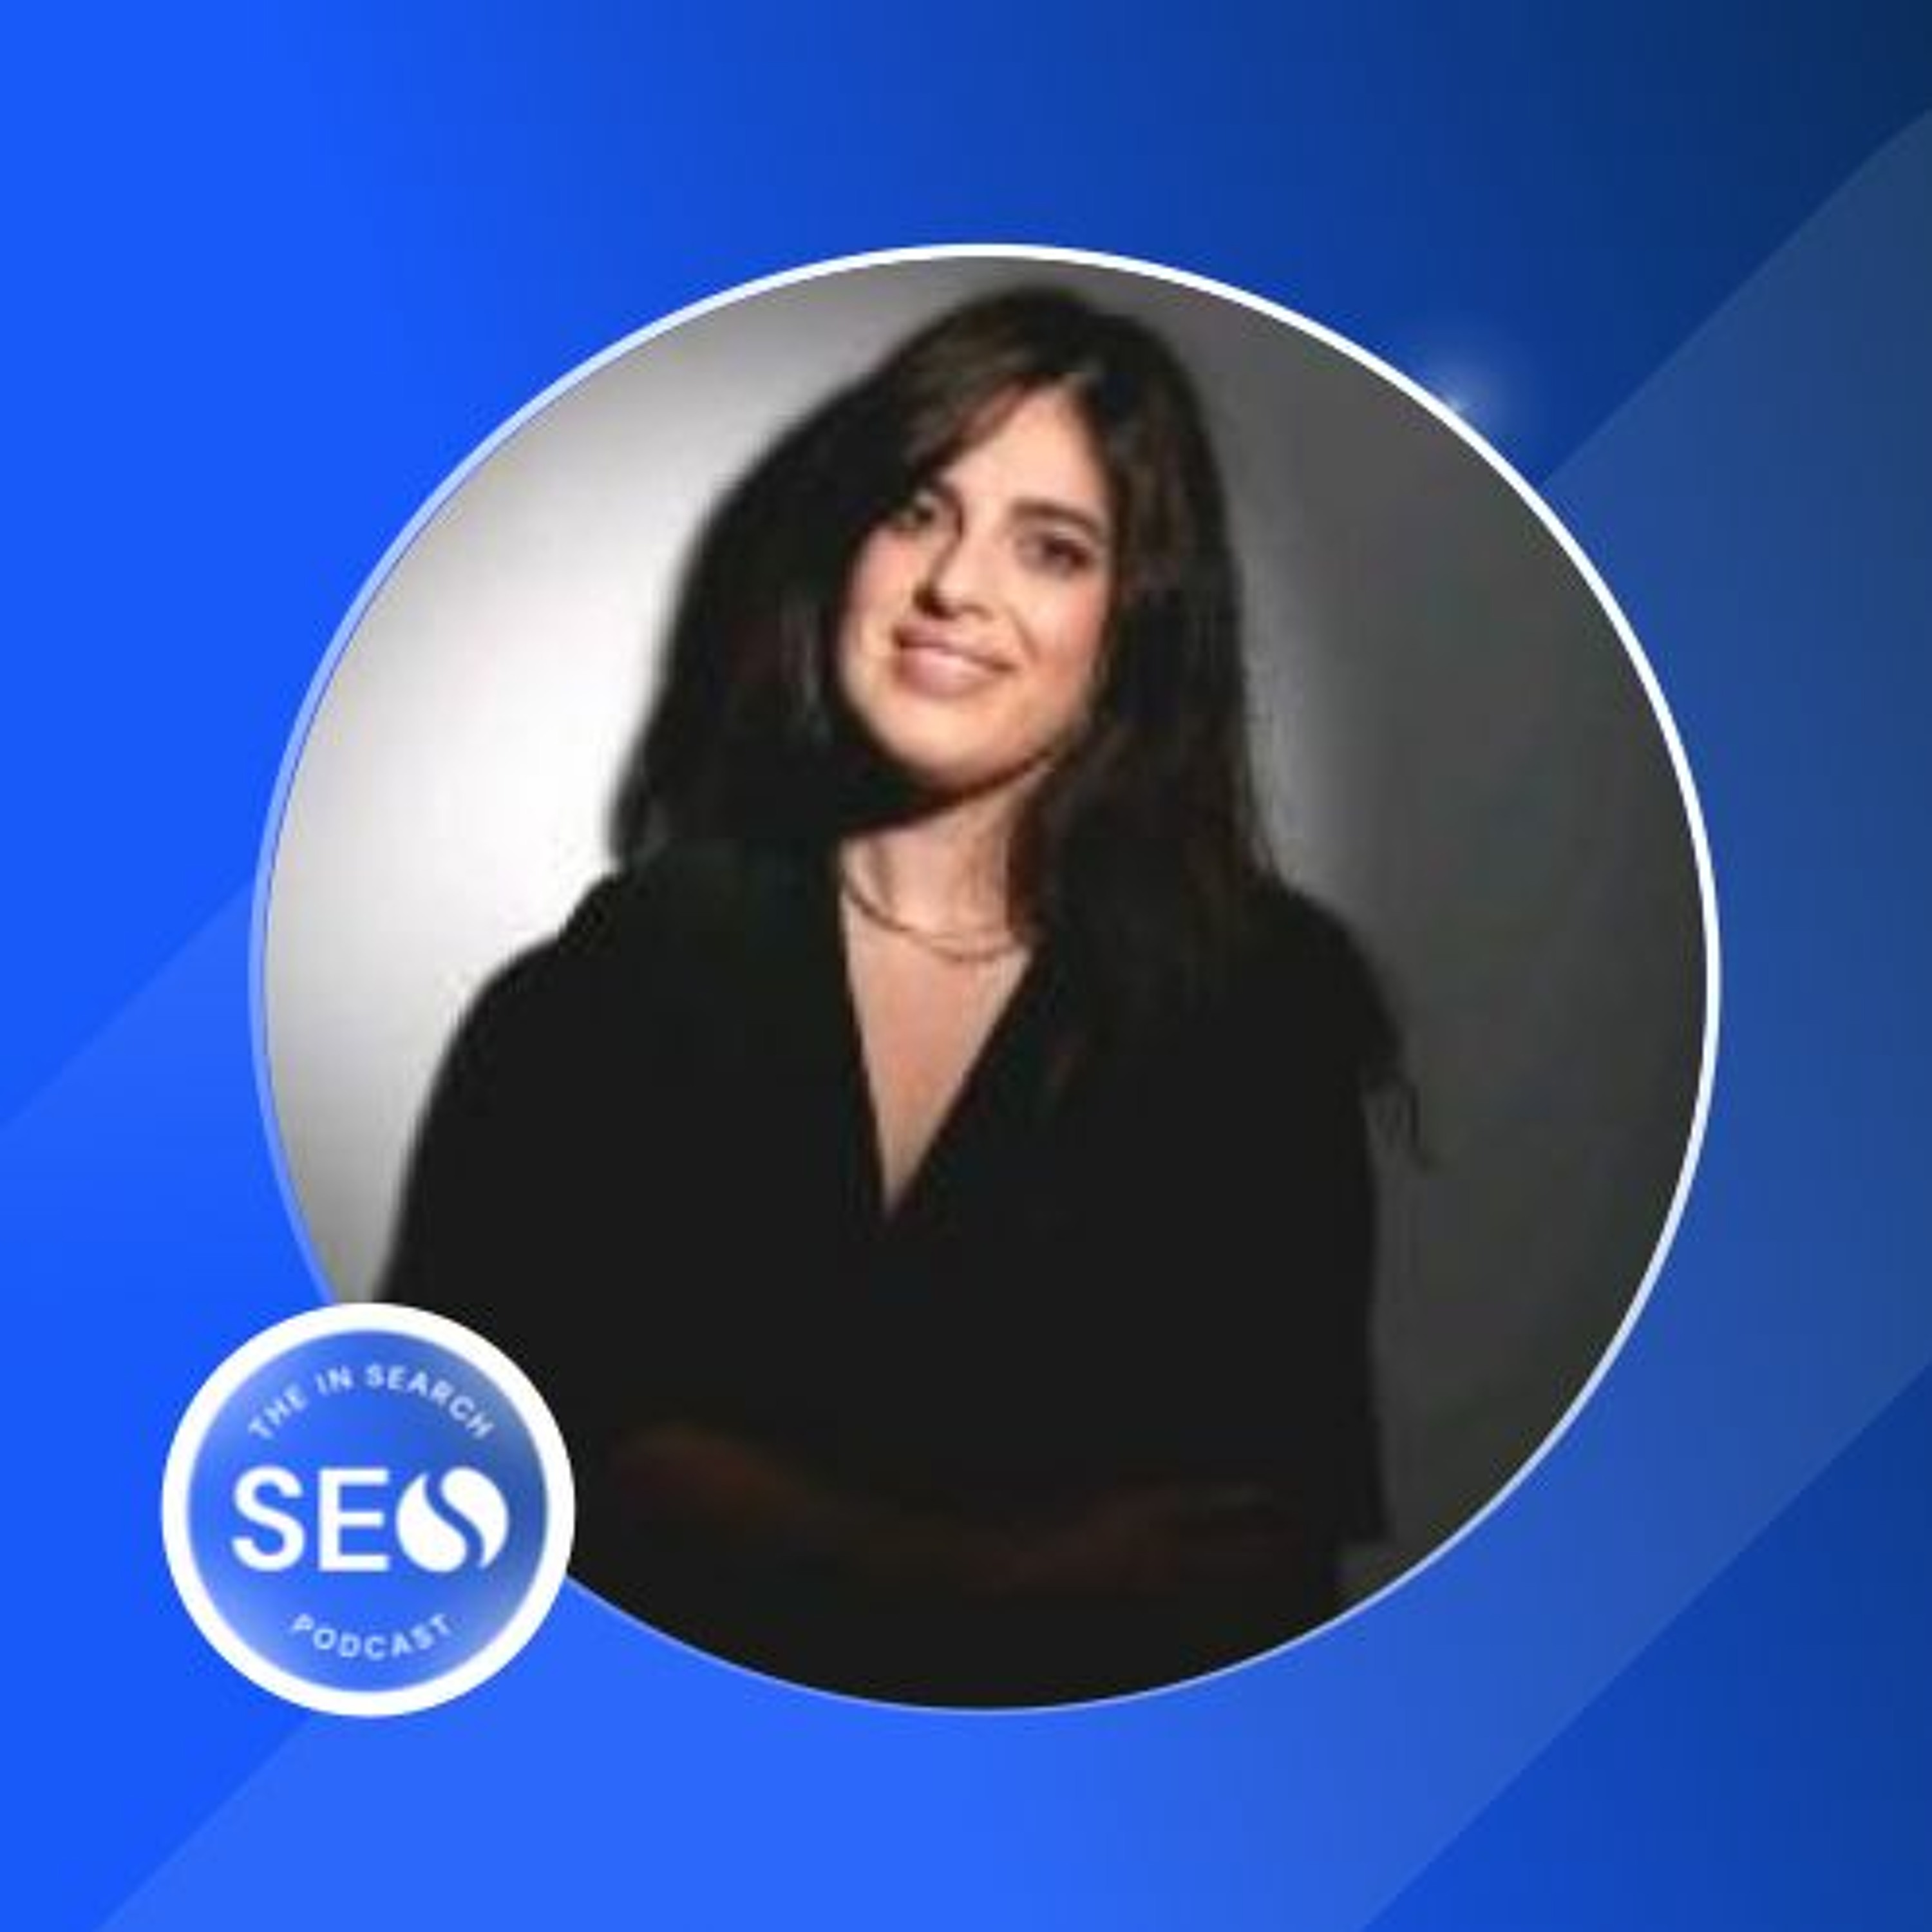 Why should you prioritize building an organic strategy before considering SEO? with Carmen Dominguez